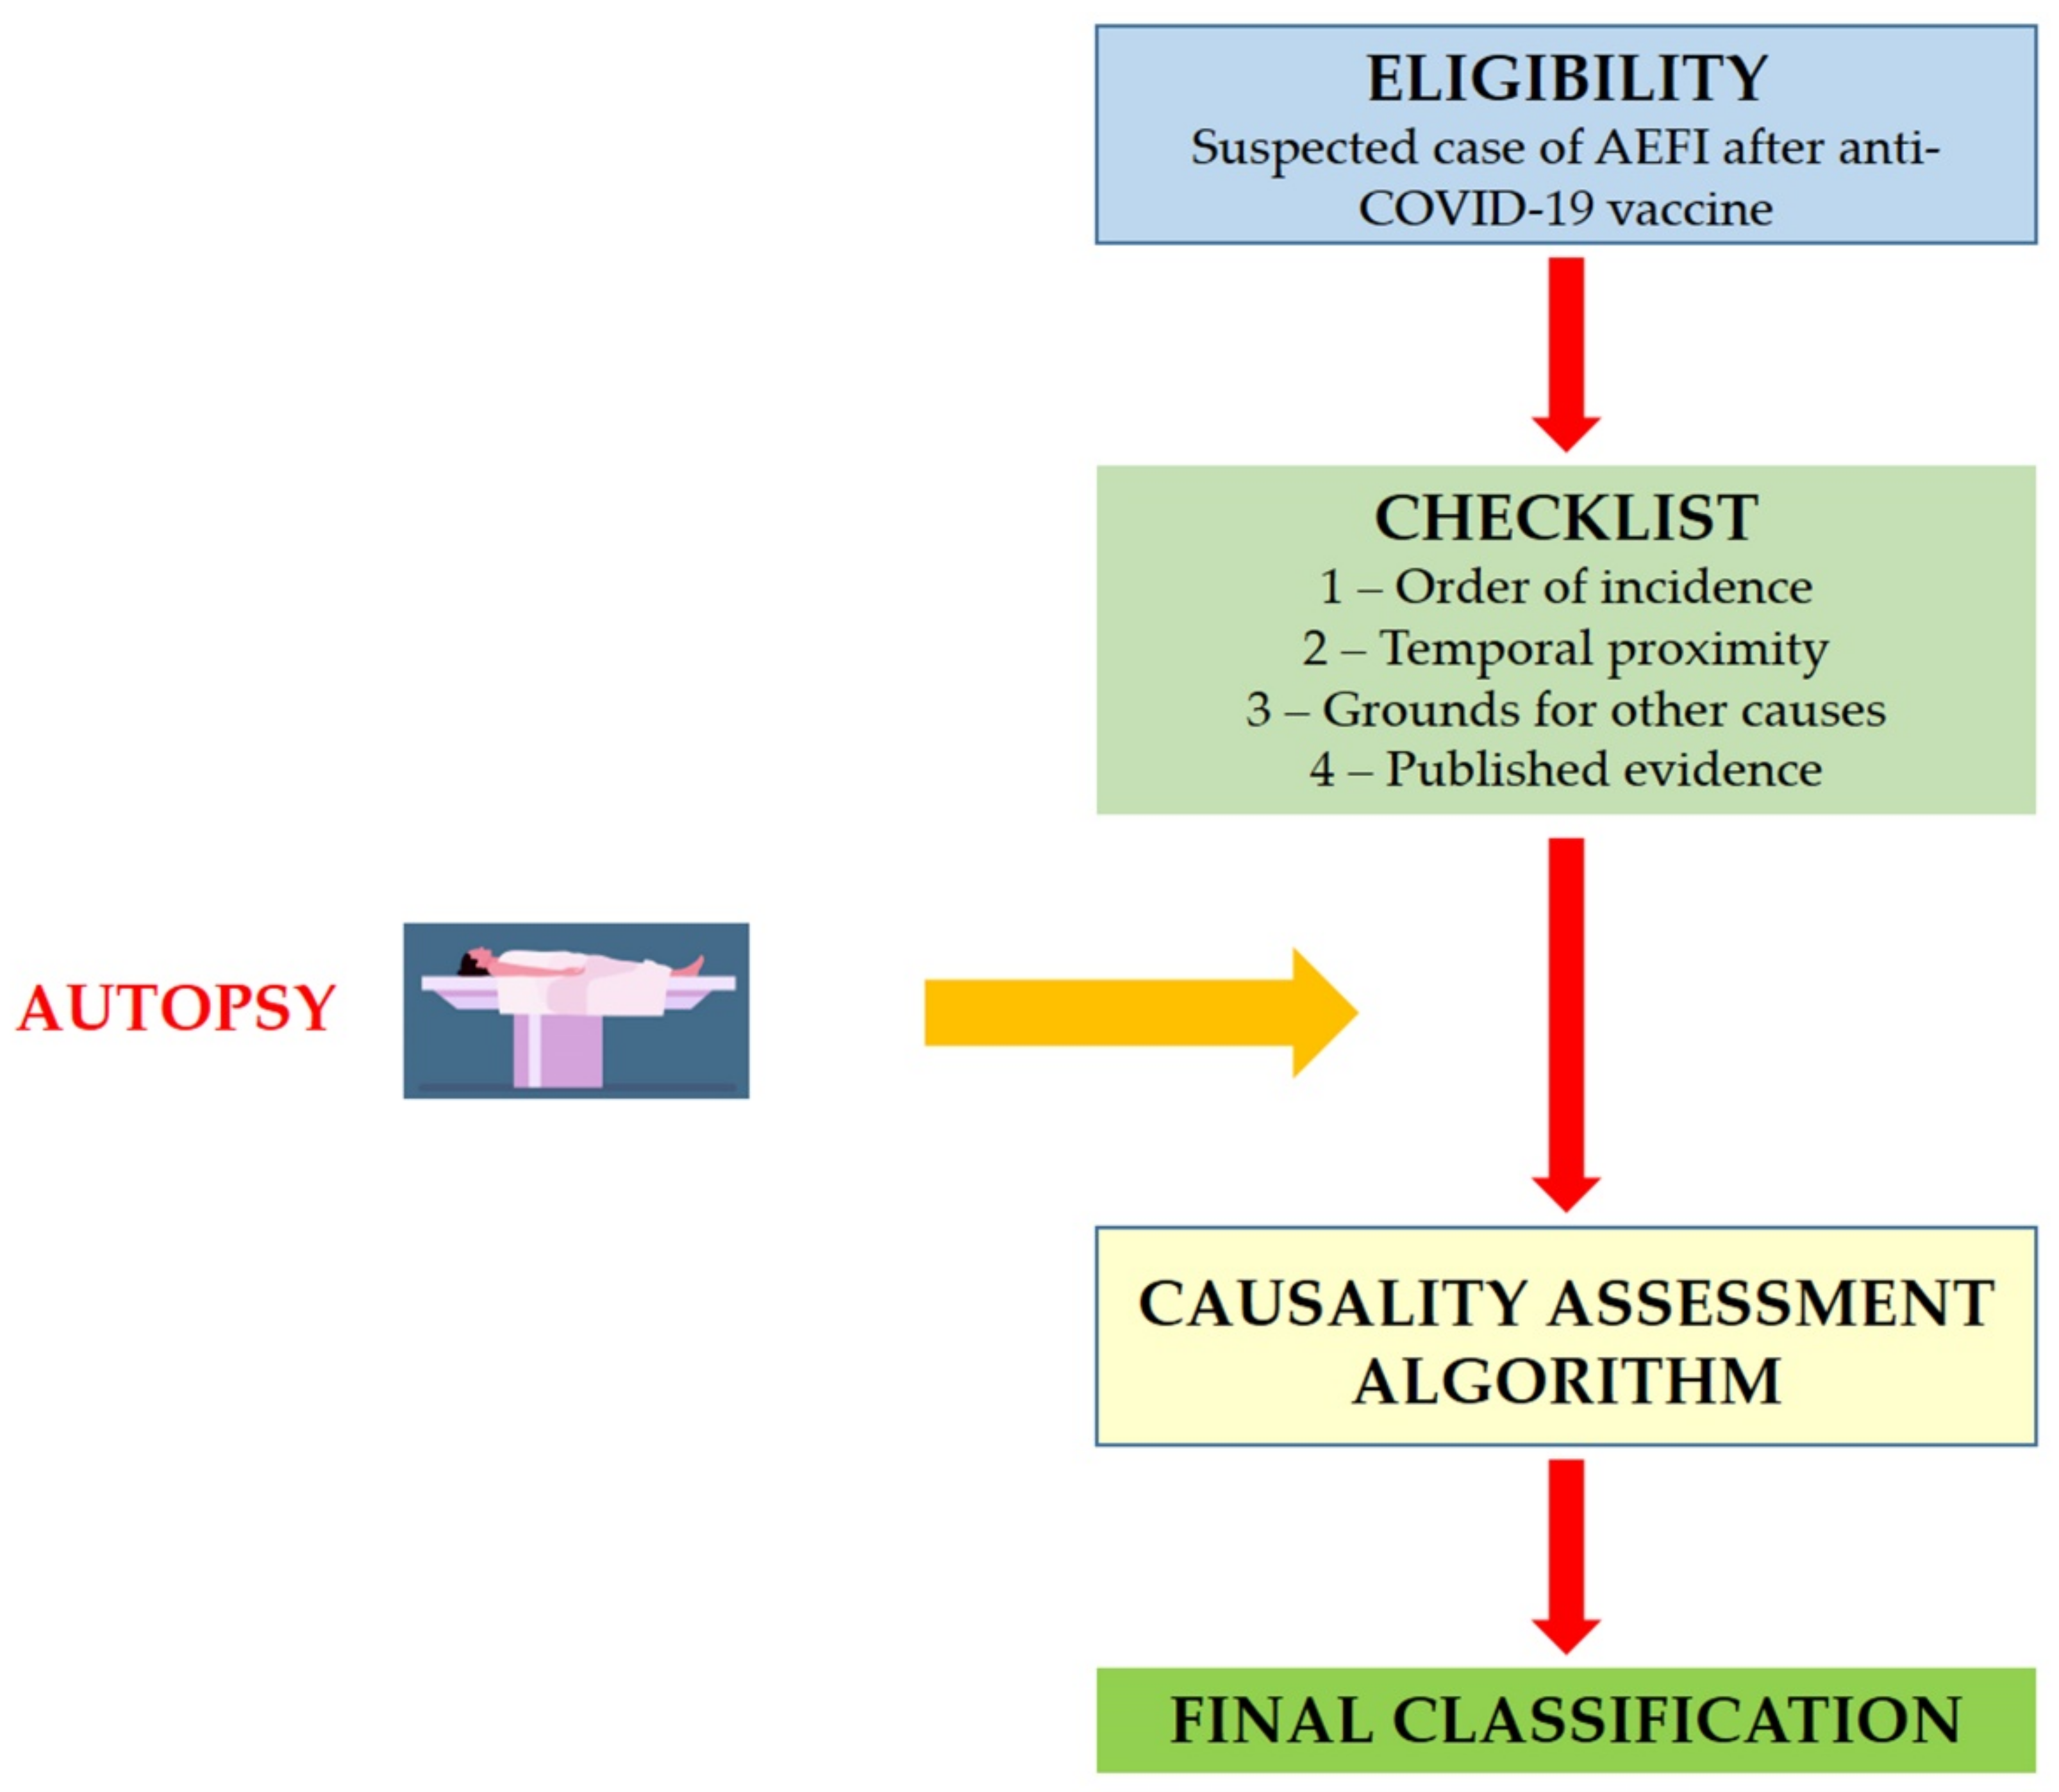 when evaluating the causality of an adverse event